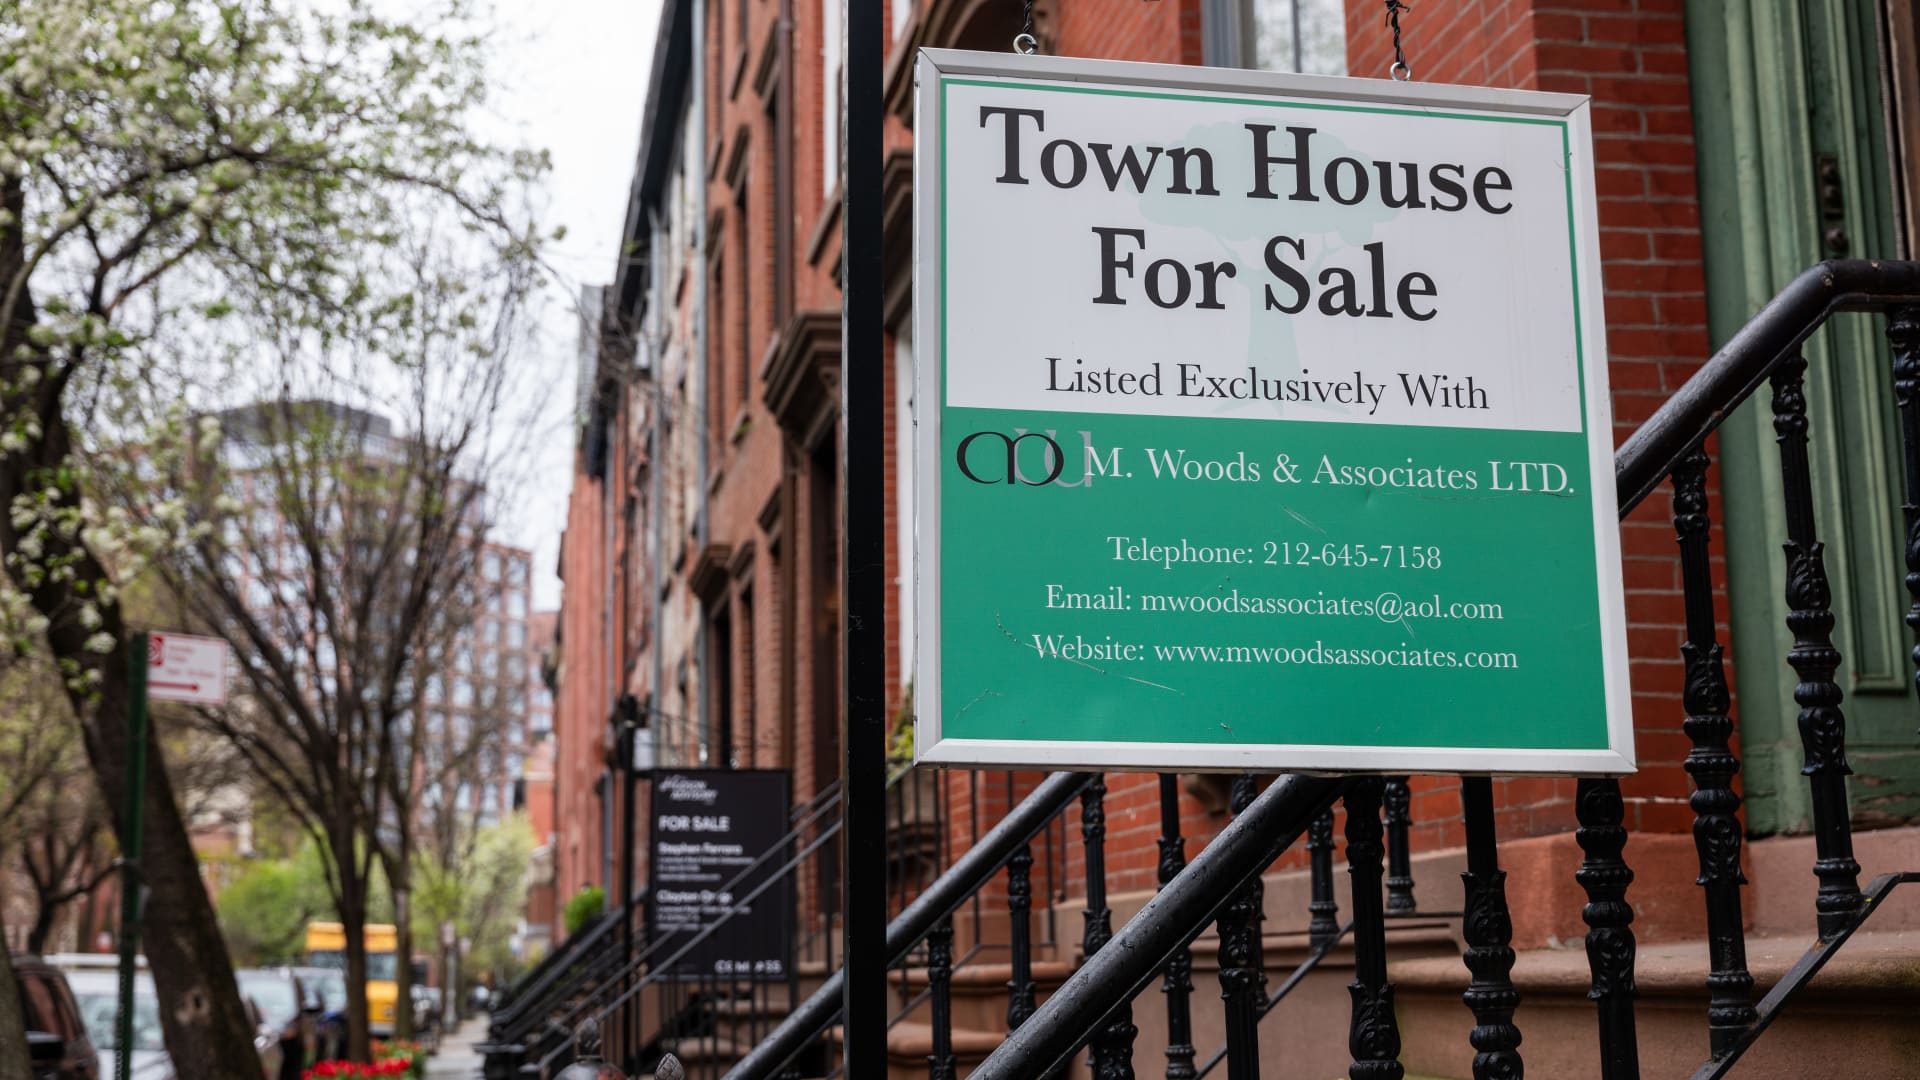 Renters' hopes of being able to buy a home have fallen to a record low, New York Fed survey shows